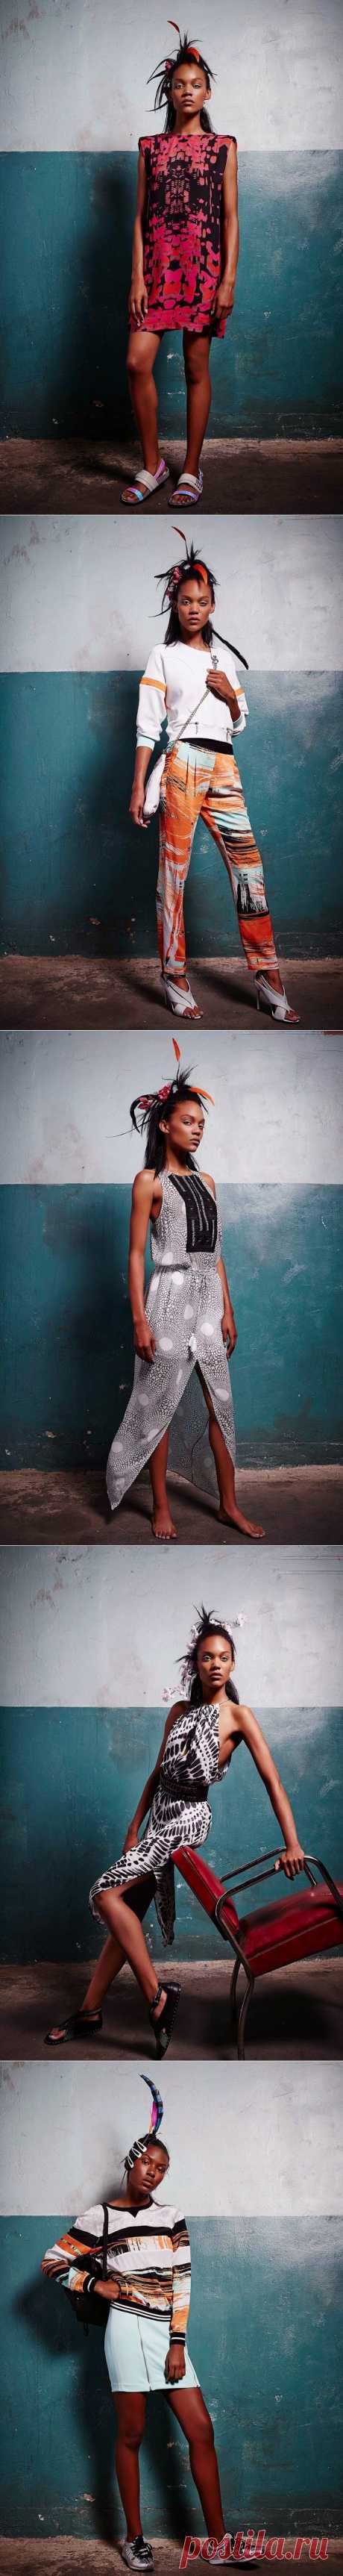 The Future is still Print: L.A.M.B.'s Spring/Summer collection | African Prints in Fashion